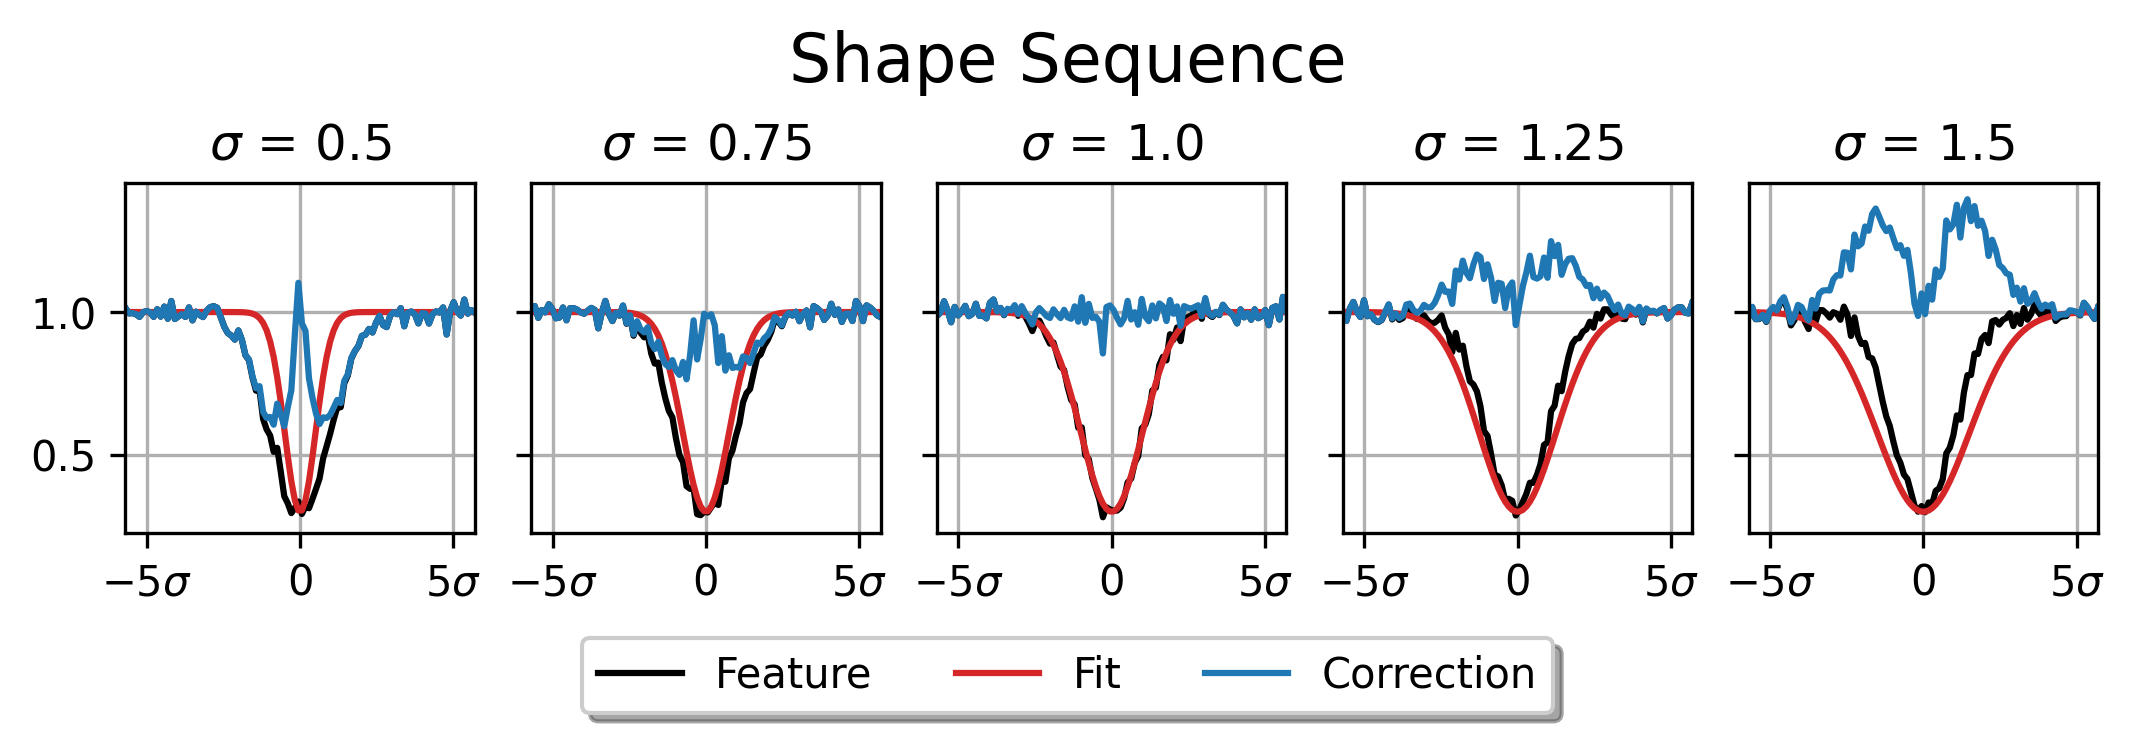 Shape Sequence